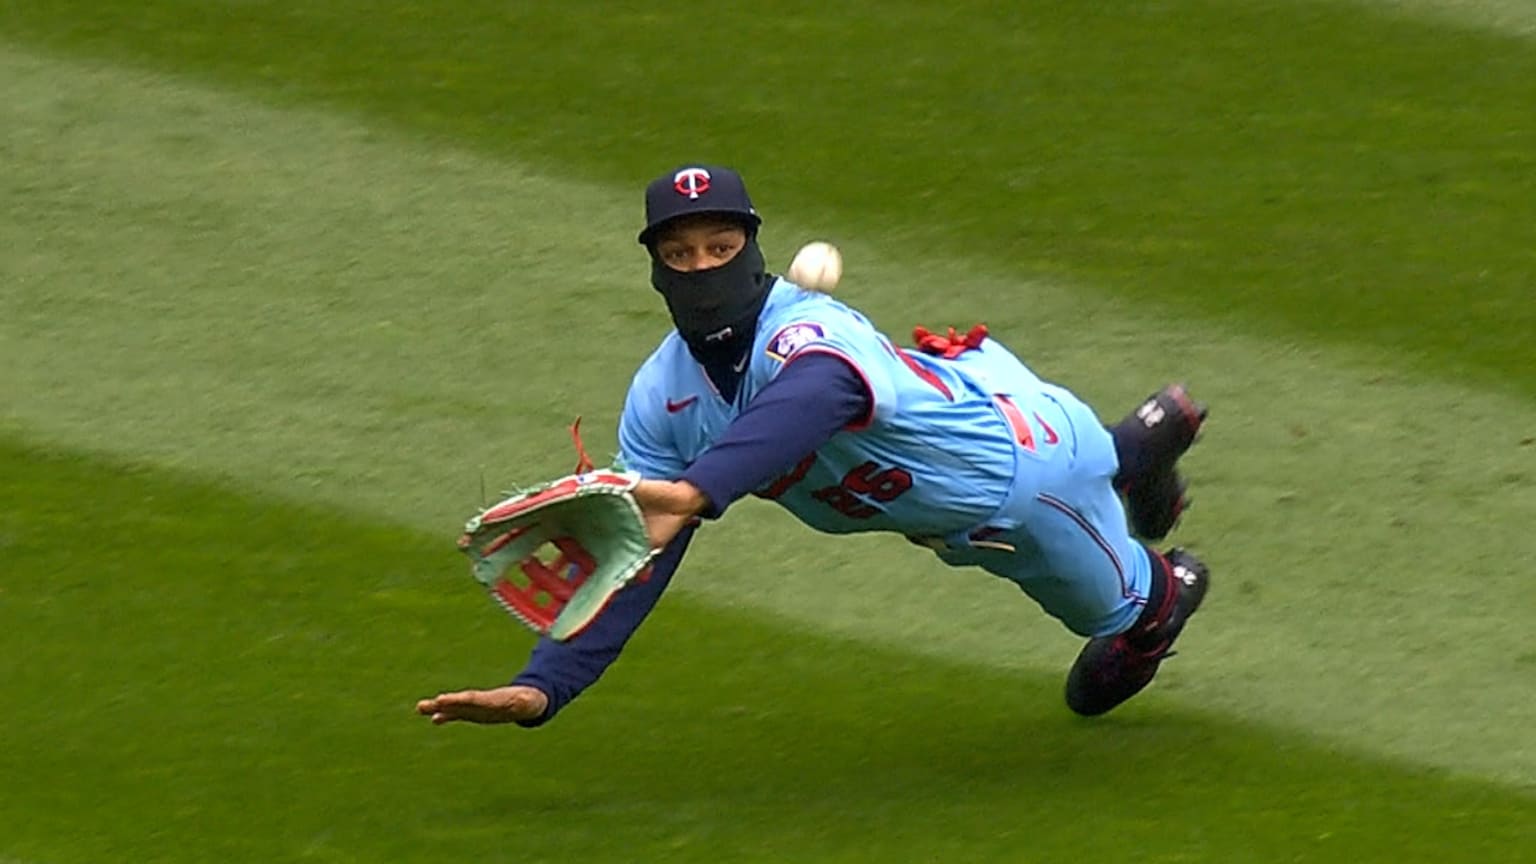 Twins' Byron Buxton stuns Tigers with incredible diving catch